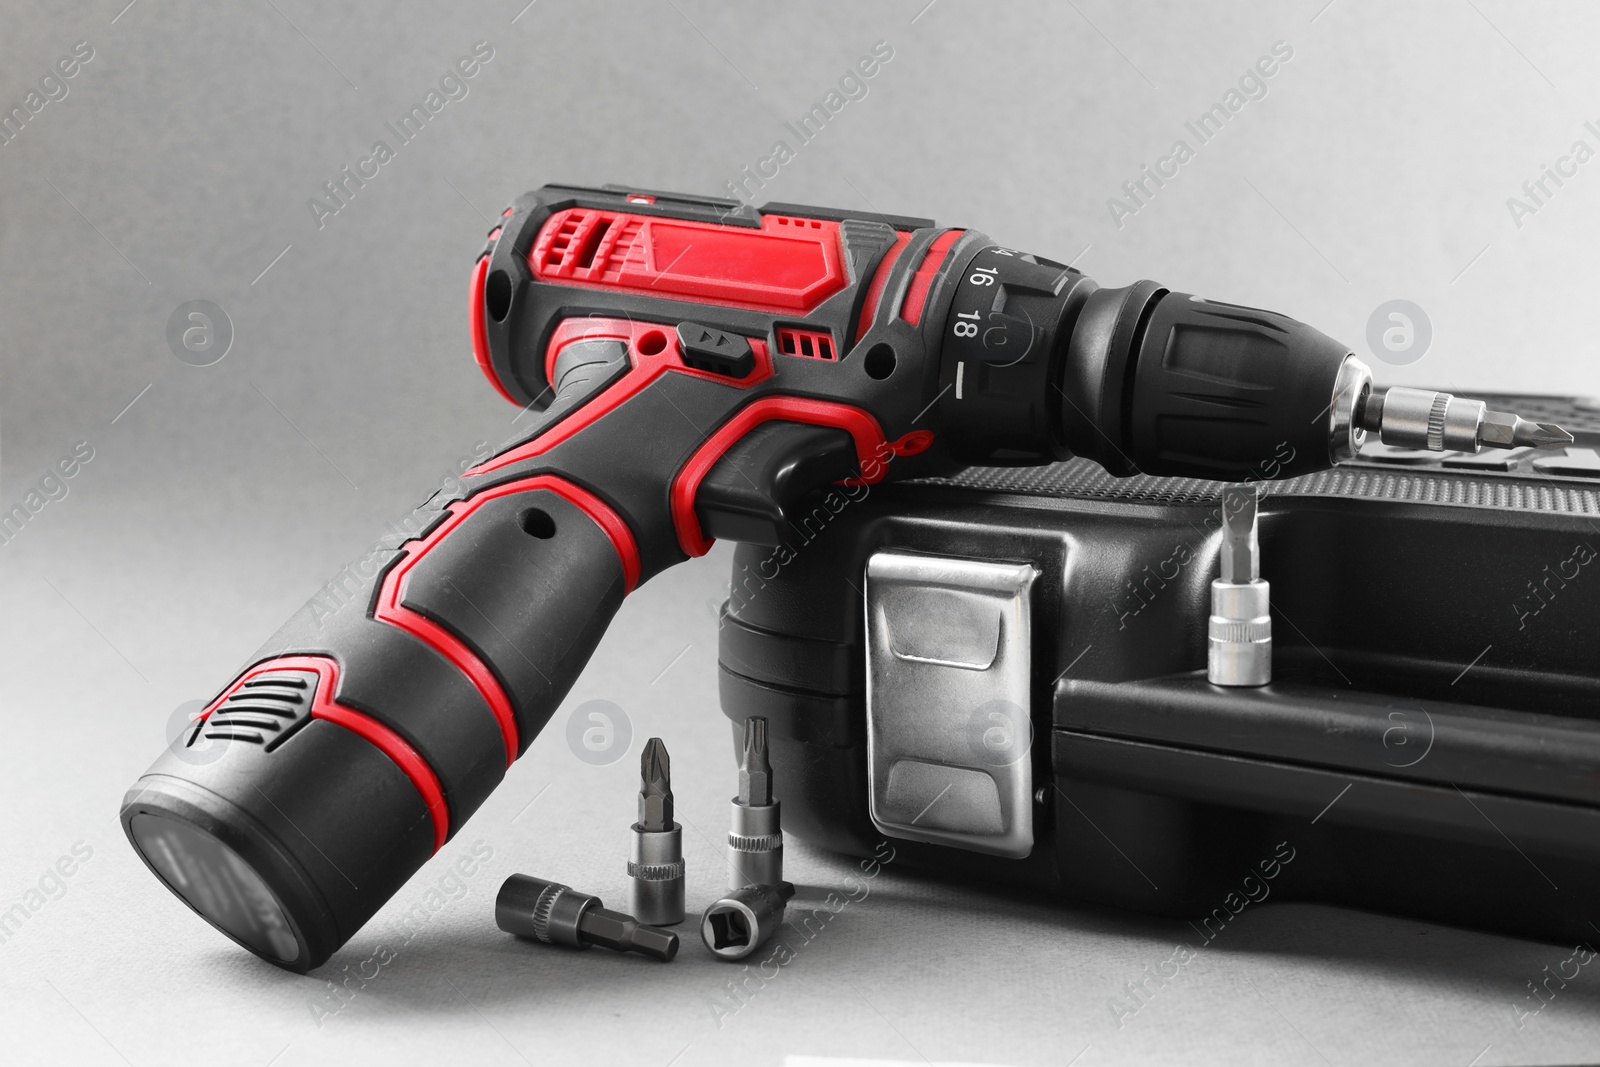 Photo of Electric screwdriver, drill bits and case on grey background, closeup